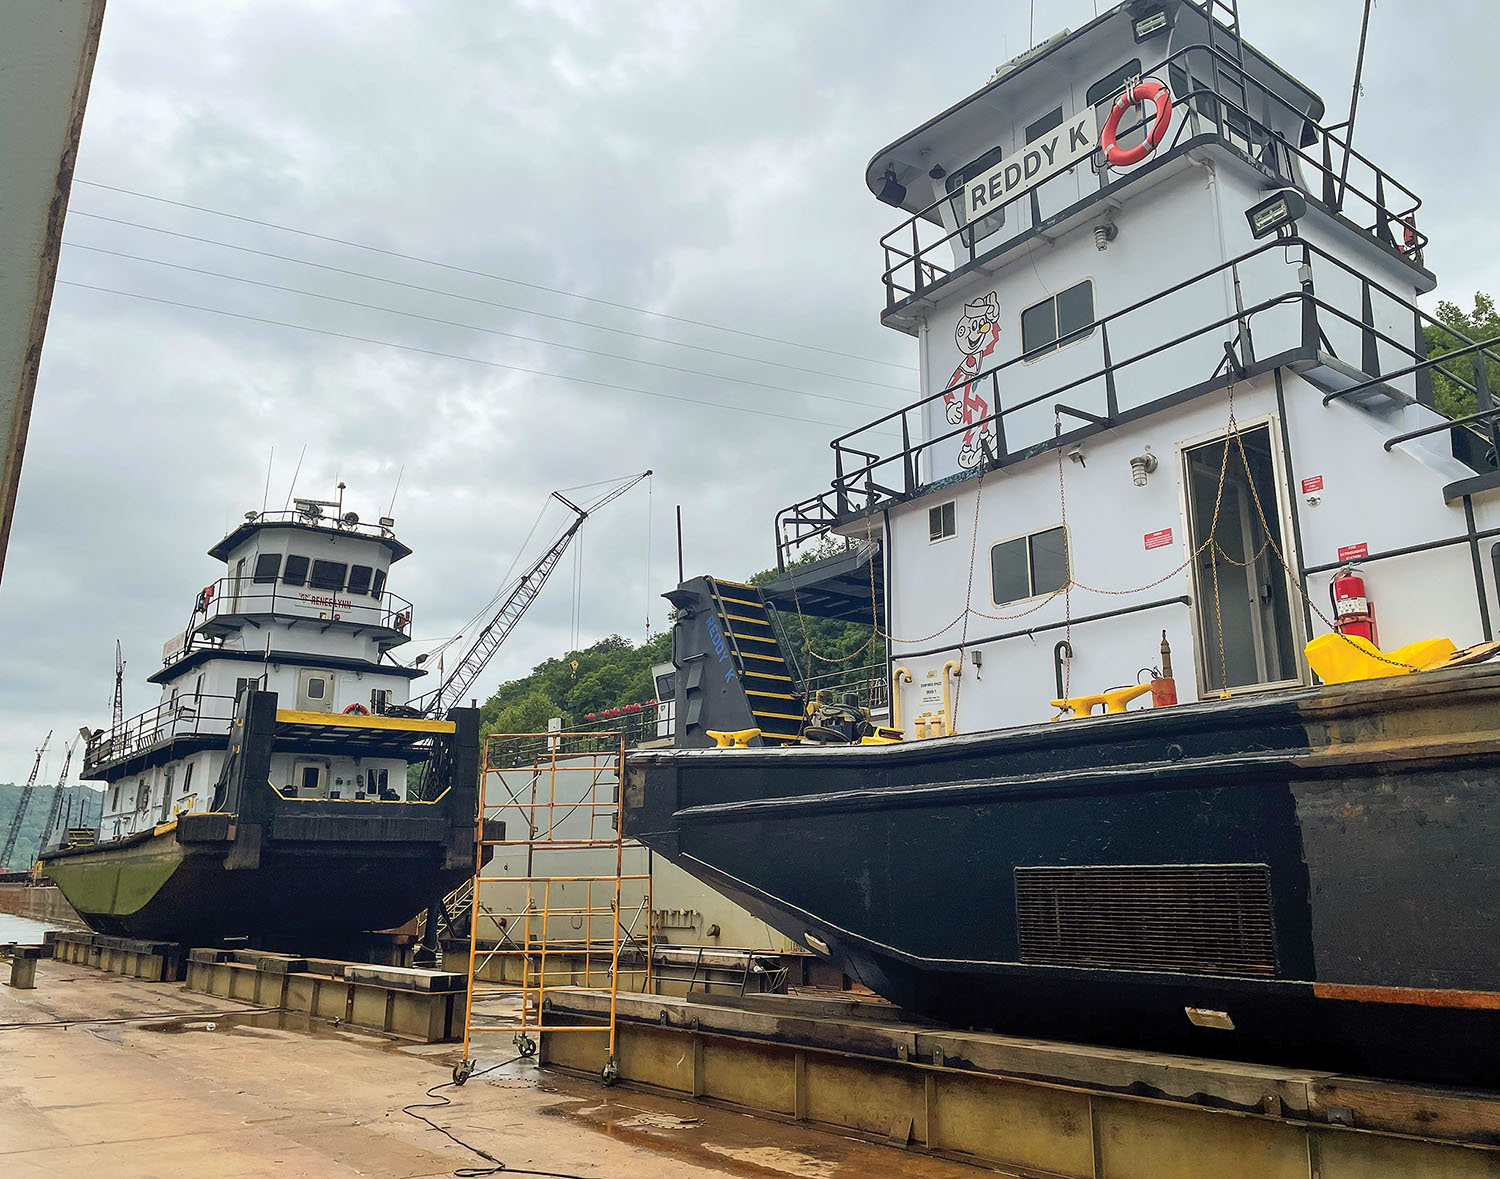 Campbell Performs First Drydock ISE At Georgetown Shipyard